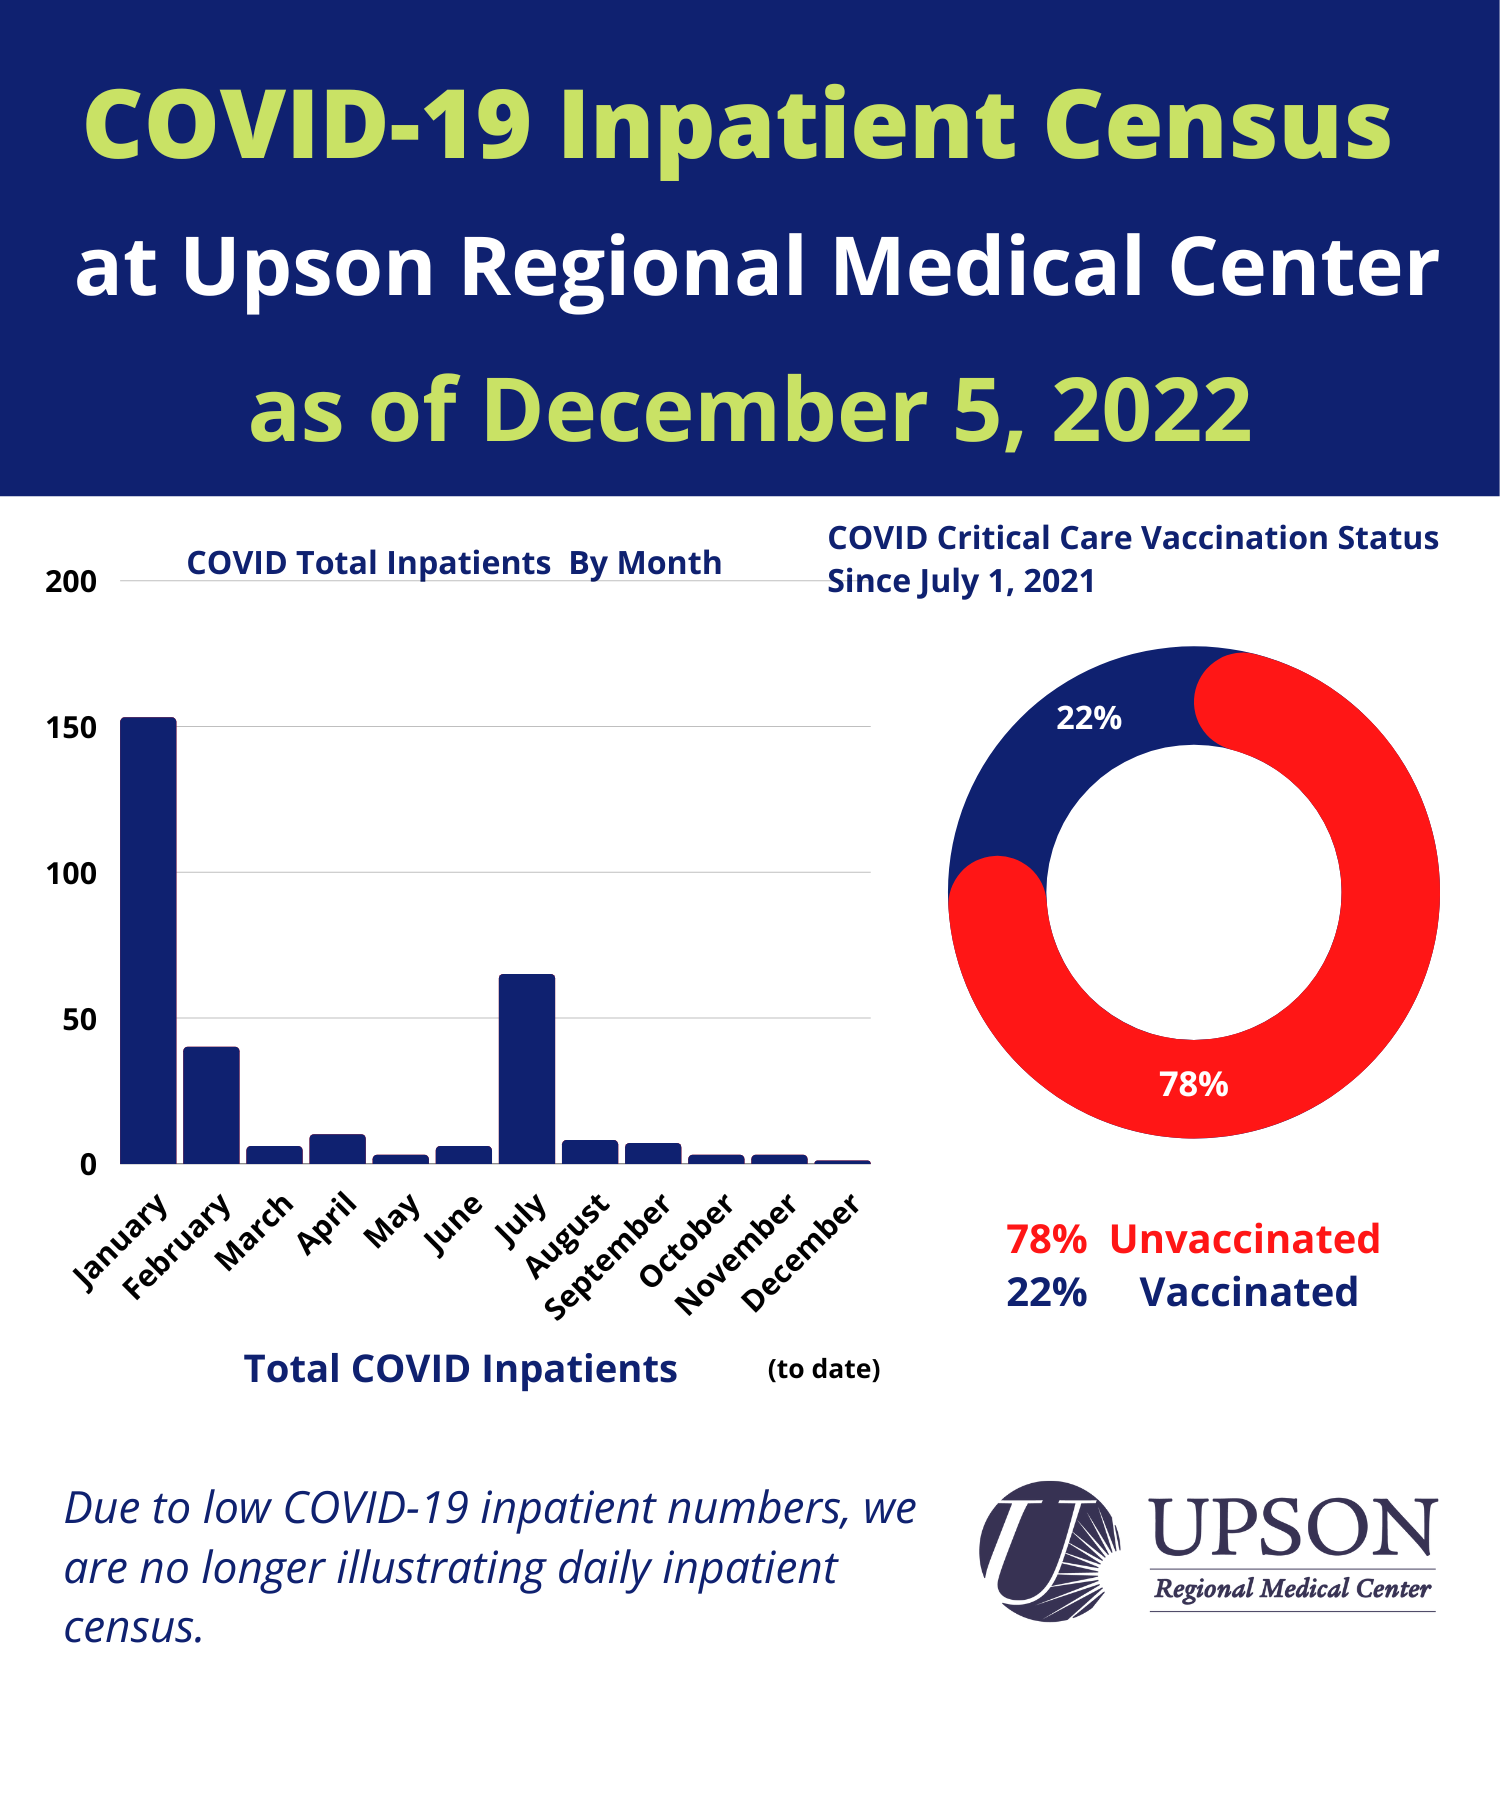 Photo for URMC COVID-19 inpatient status as of December 5, 2022.